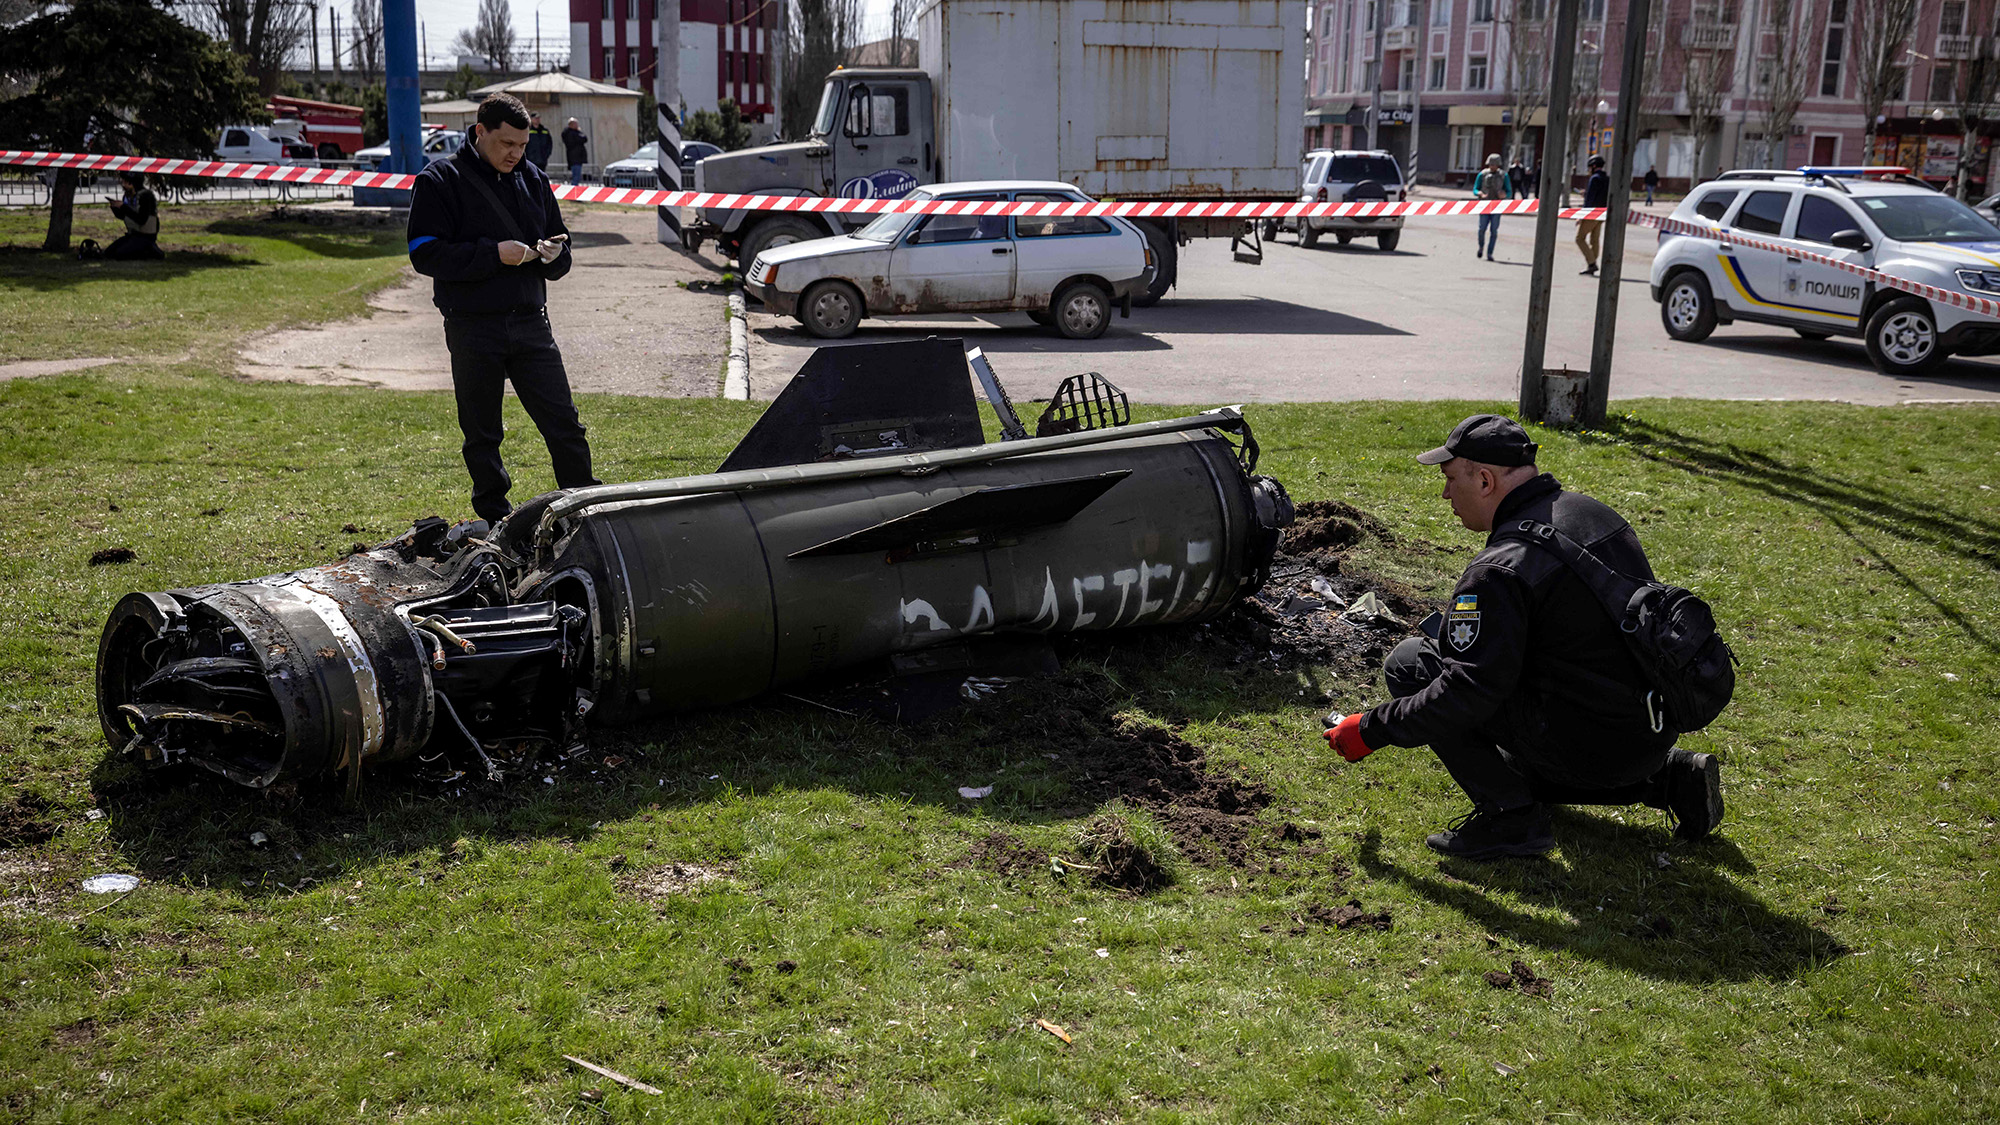 Ukrainian police inspect the remains of a large rocket next to the main building of a train station in Kramatorsk, Ukraine on April 8.